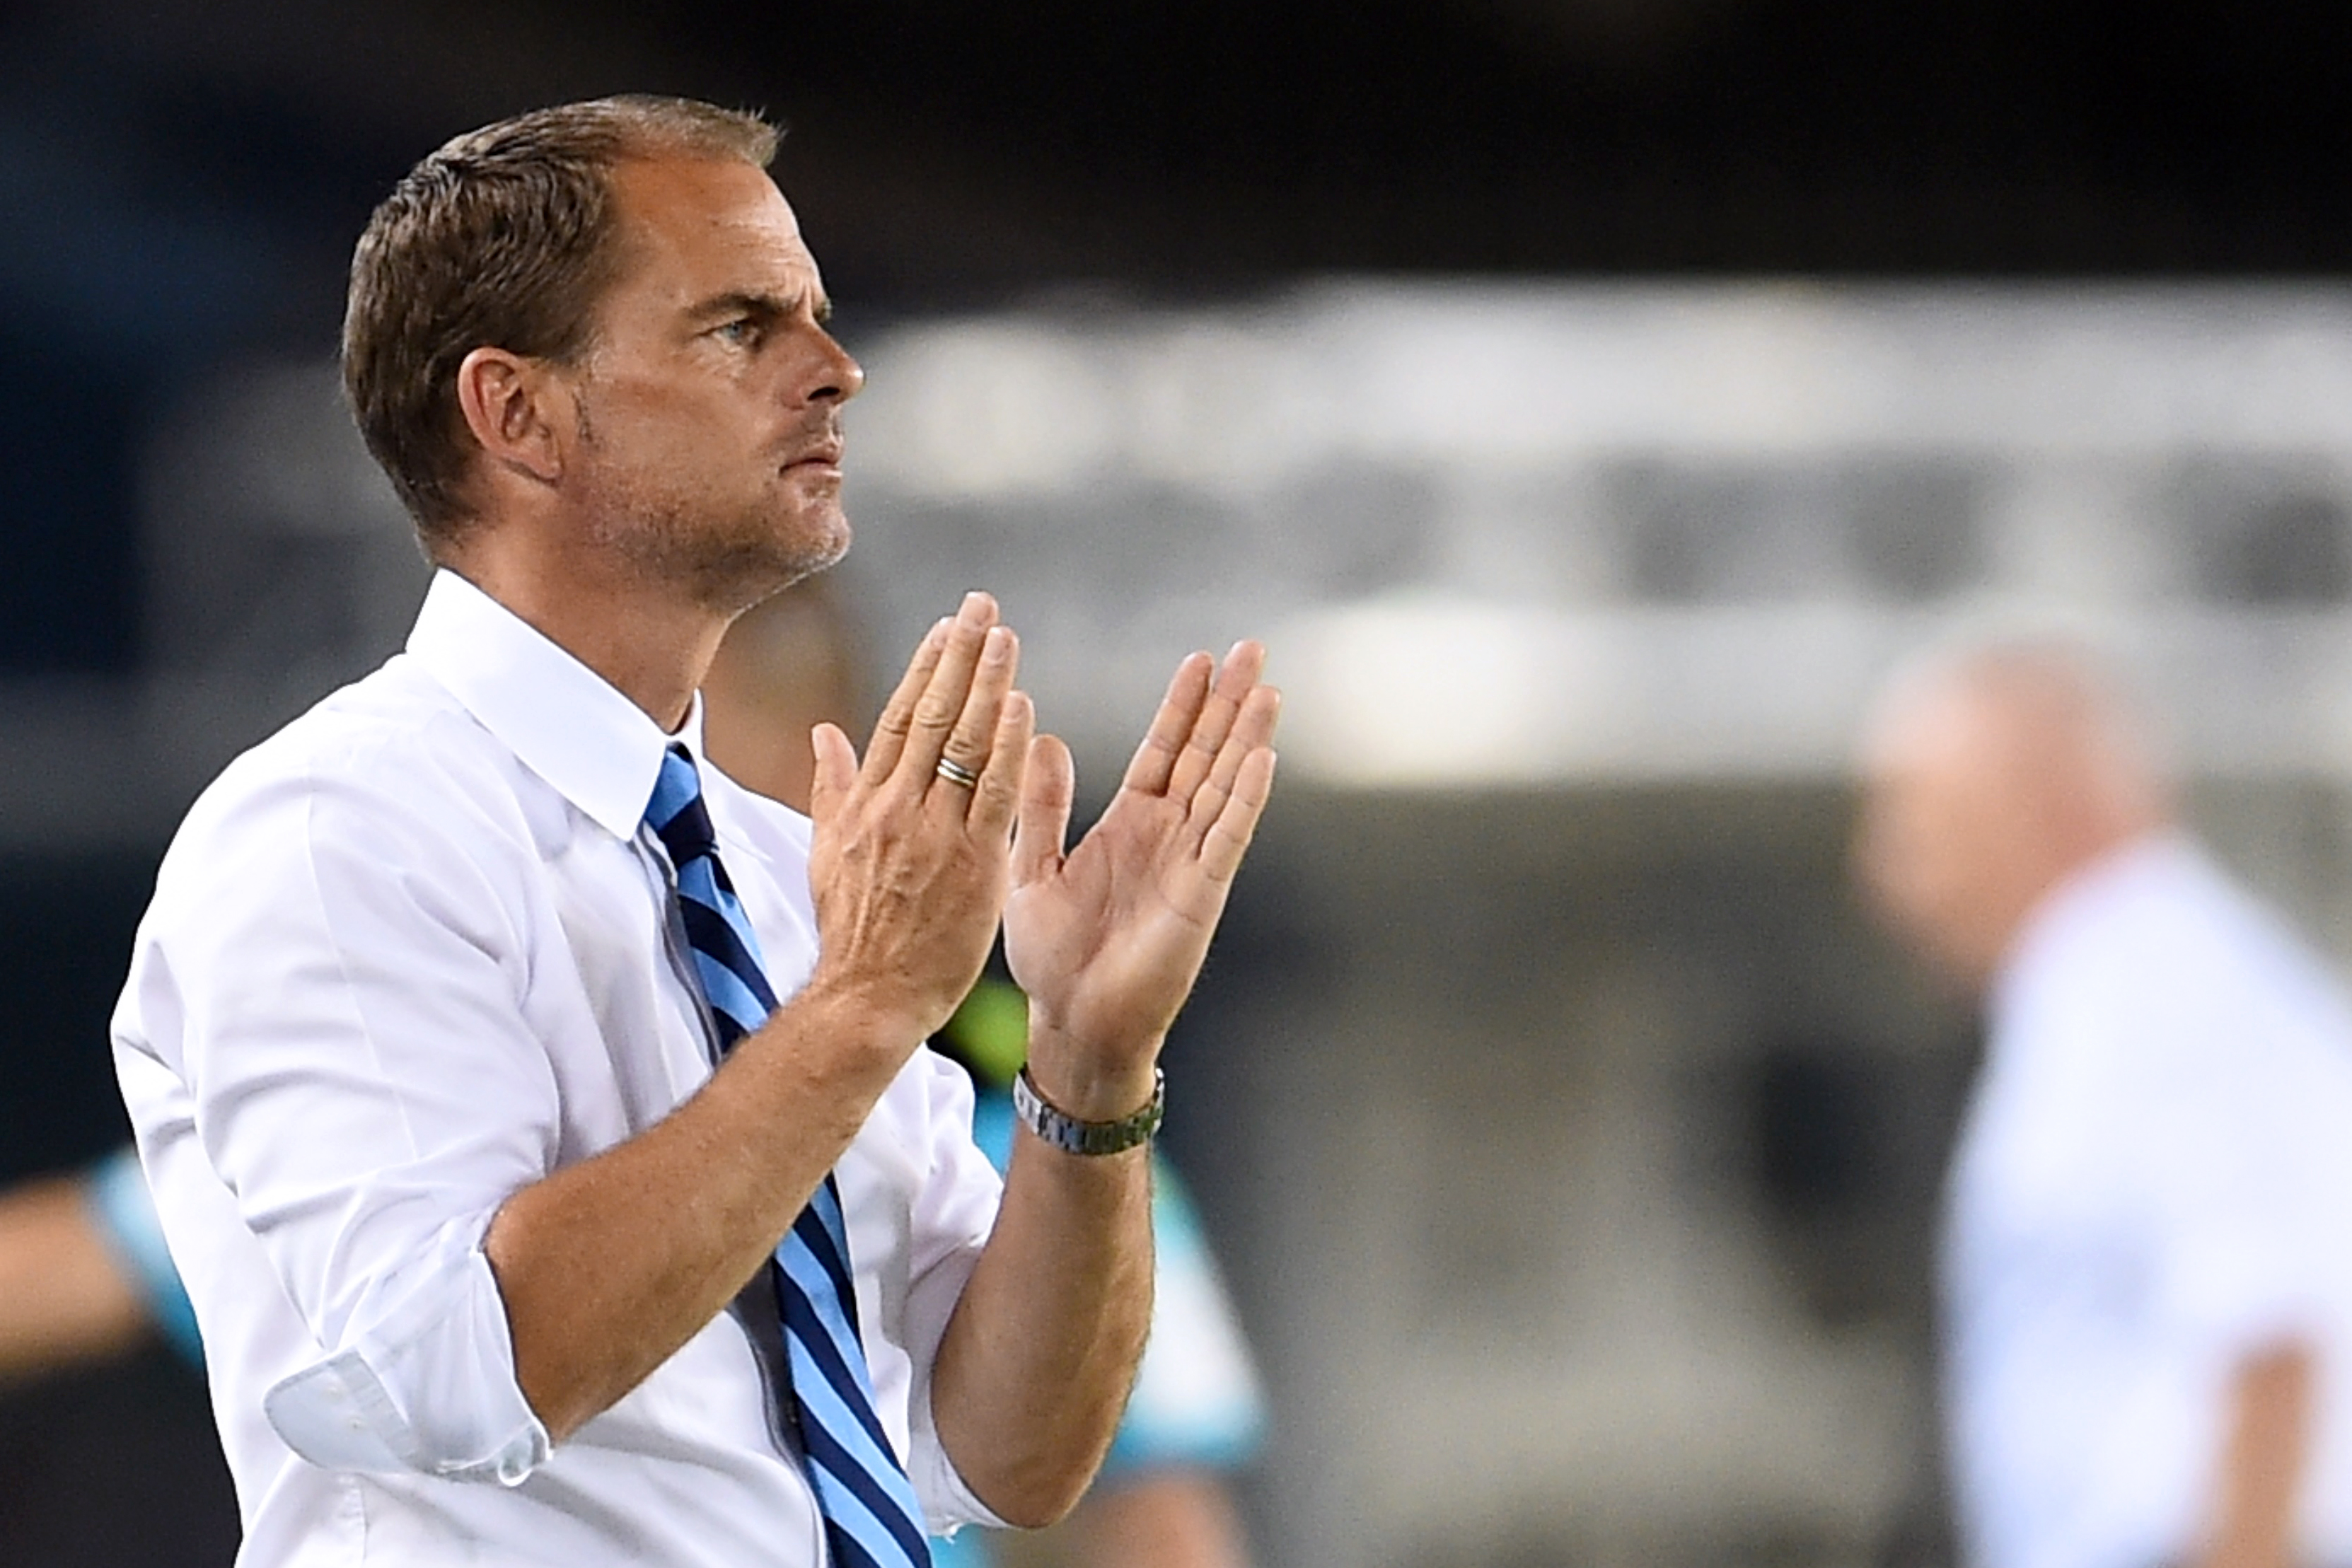 De Boer’s agent to FcInterNews: “There’s not much to say”